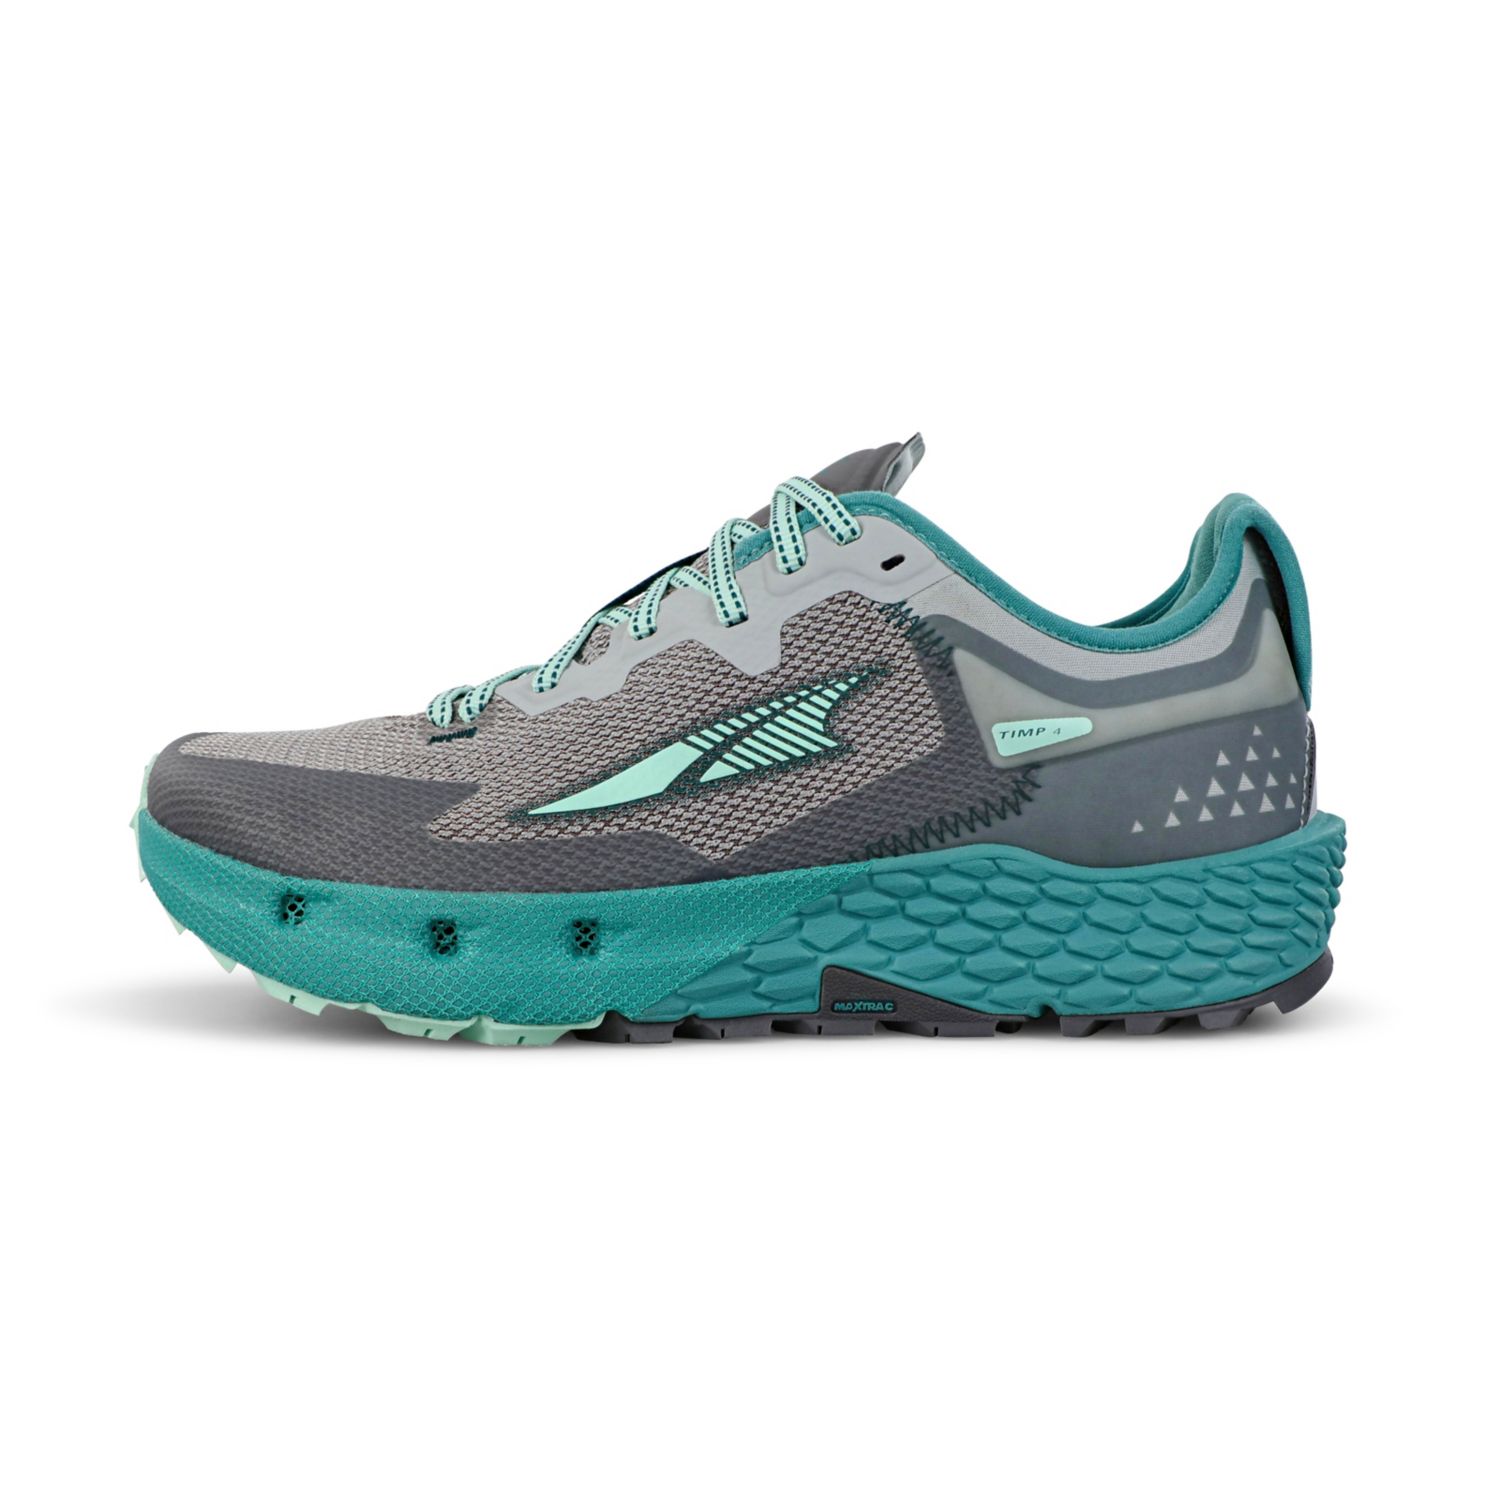 Grey / Turquoise Women's Altra Timp 4 Trail Running Shoes | UAE-41395789